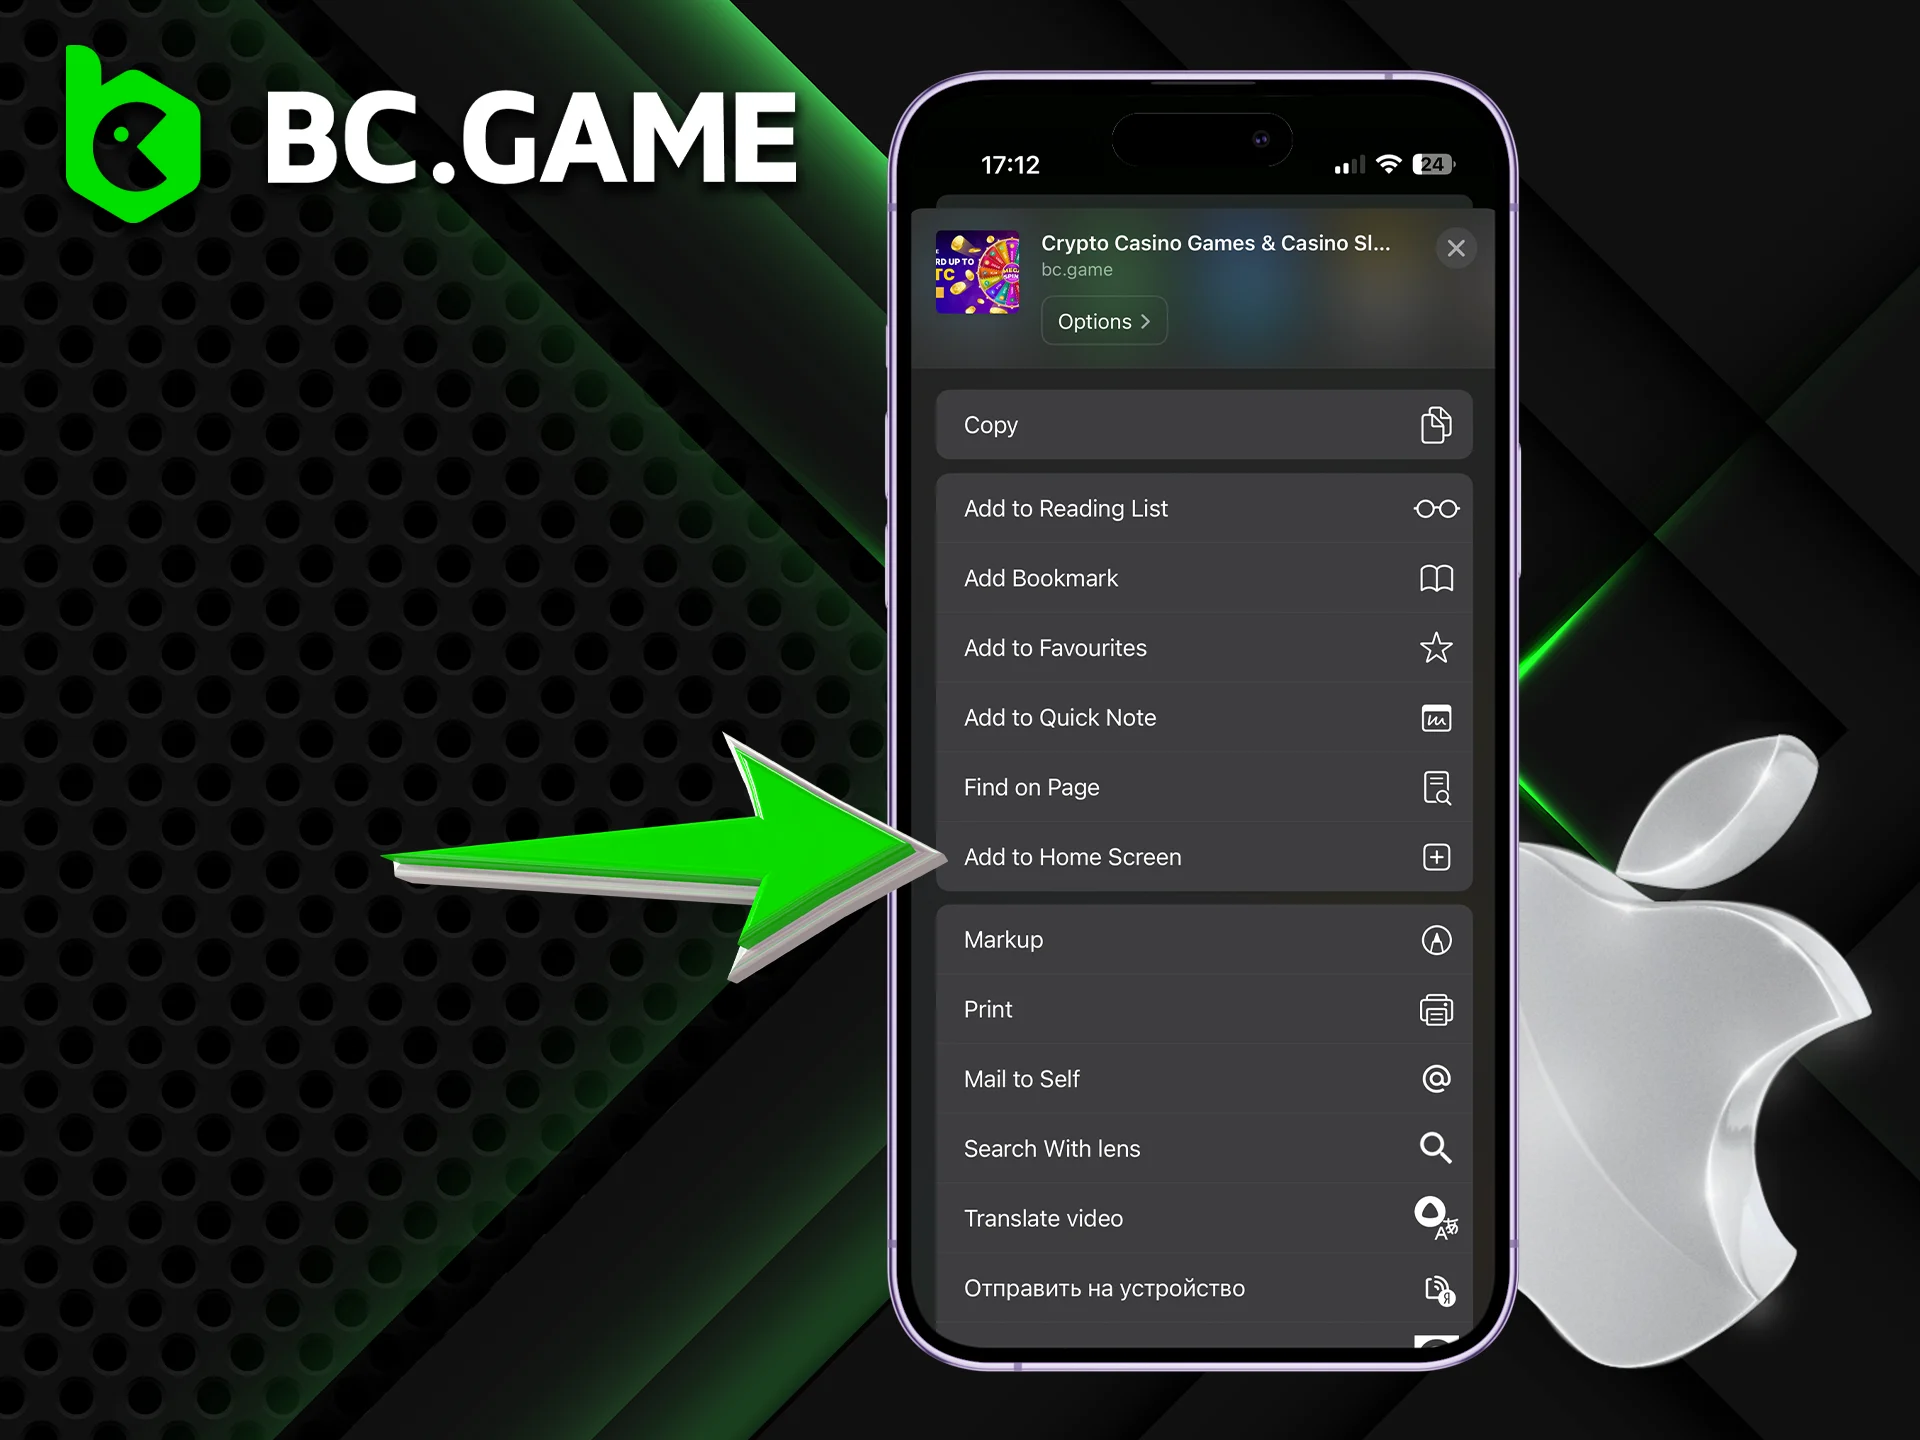 Add the BC GAME icon to the home screen of your iPhone.